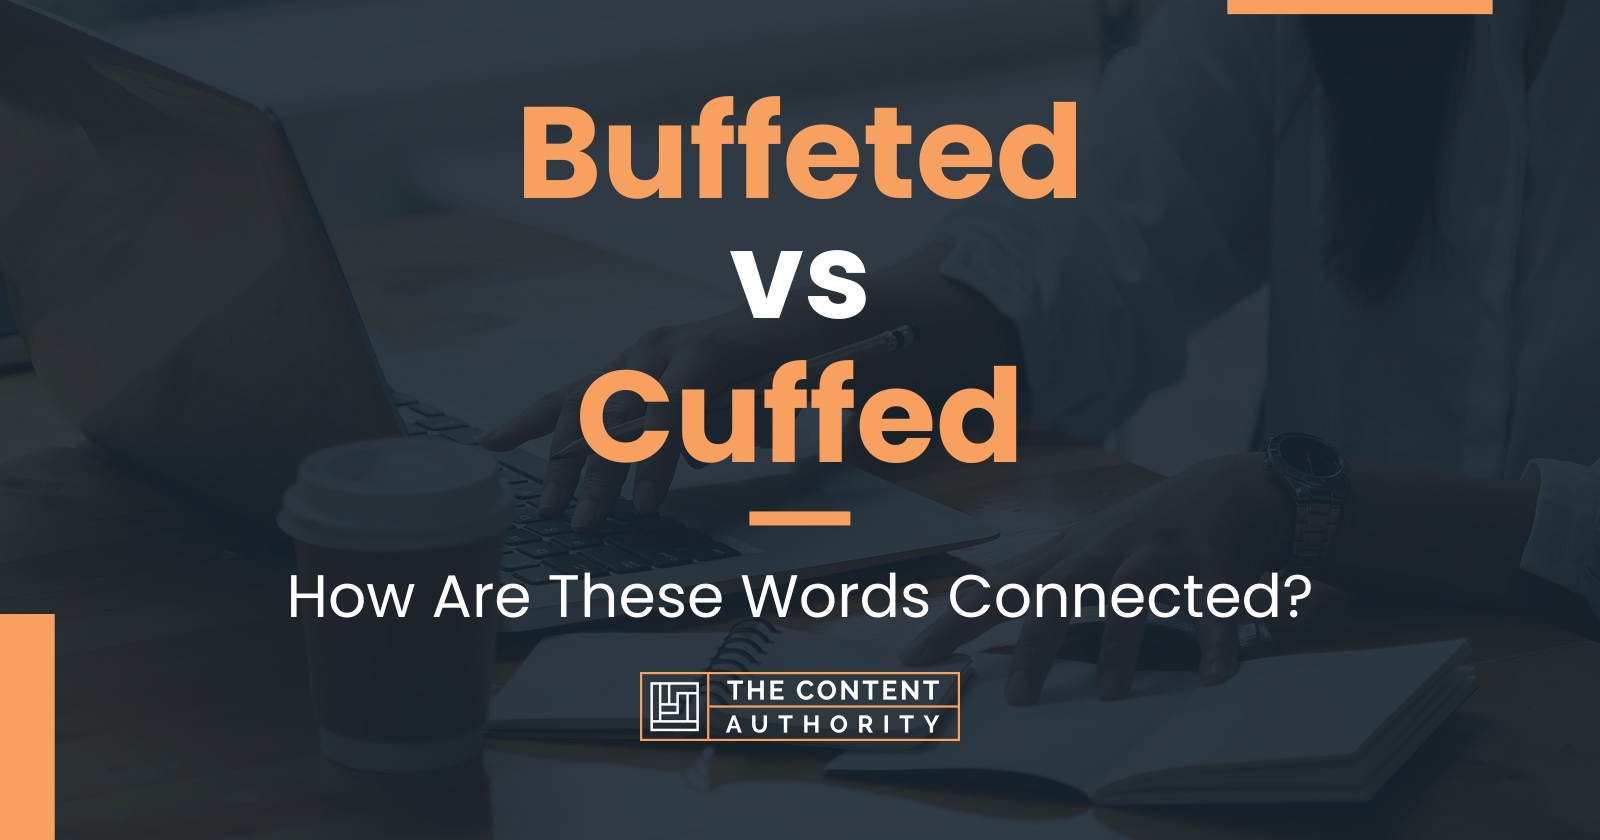 Buffeted vs Cuffed: How Are These Words Connected?